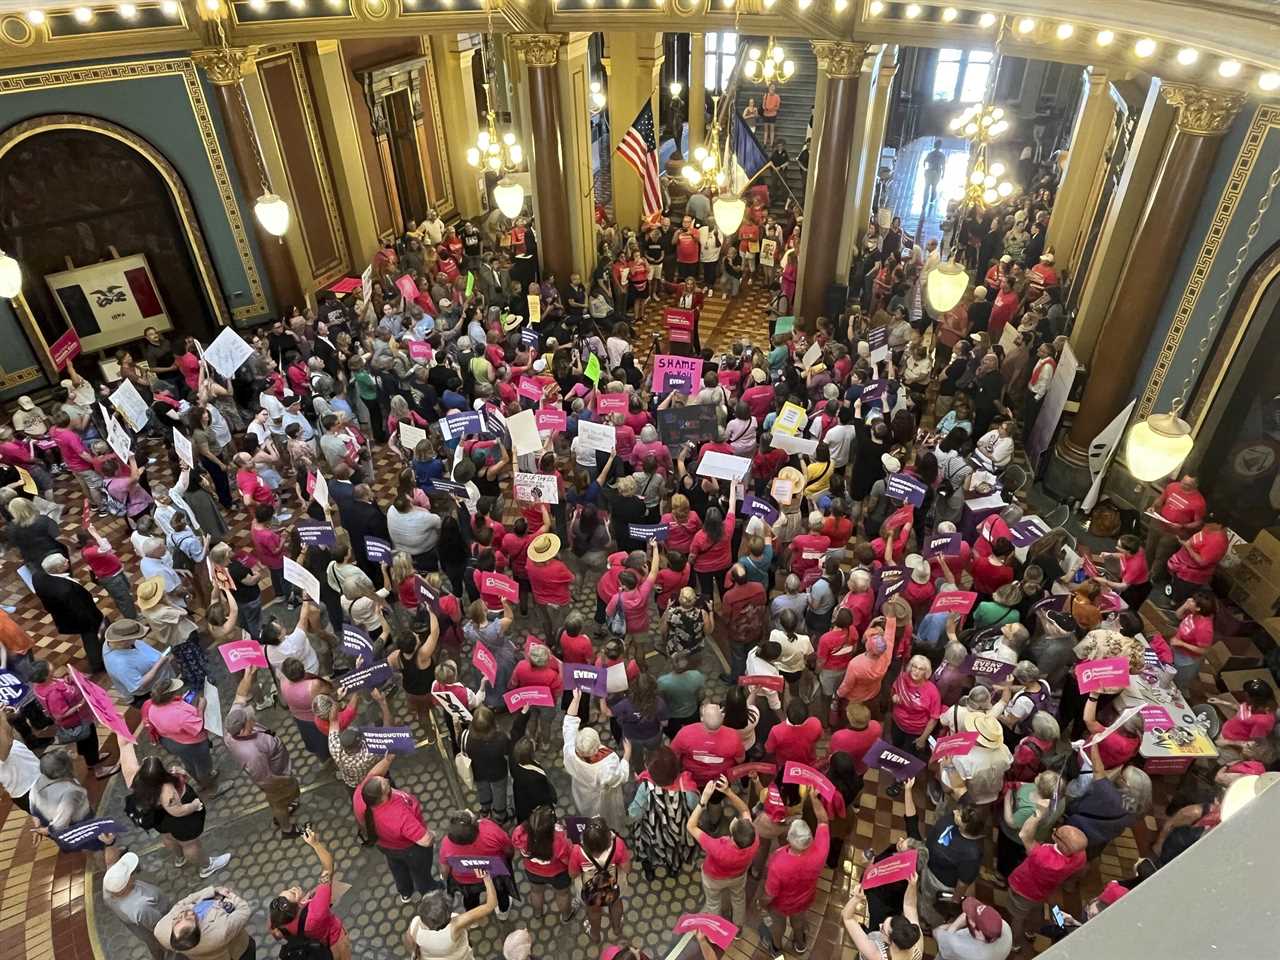 Iowa lawmakers ban abortions up to 6 weeks.